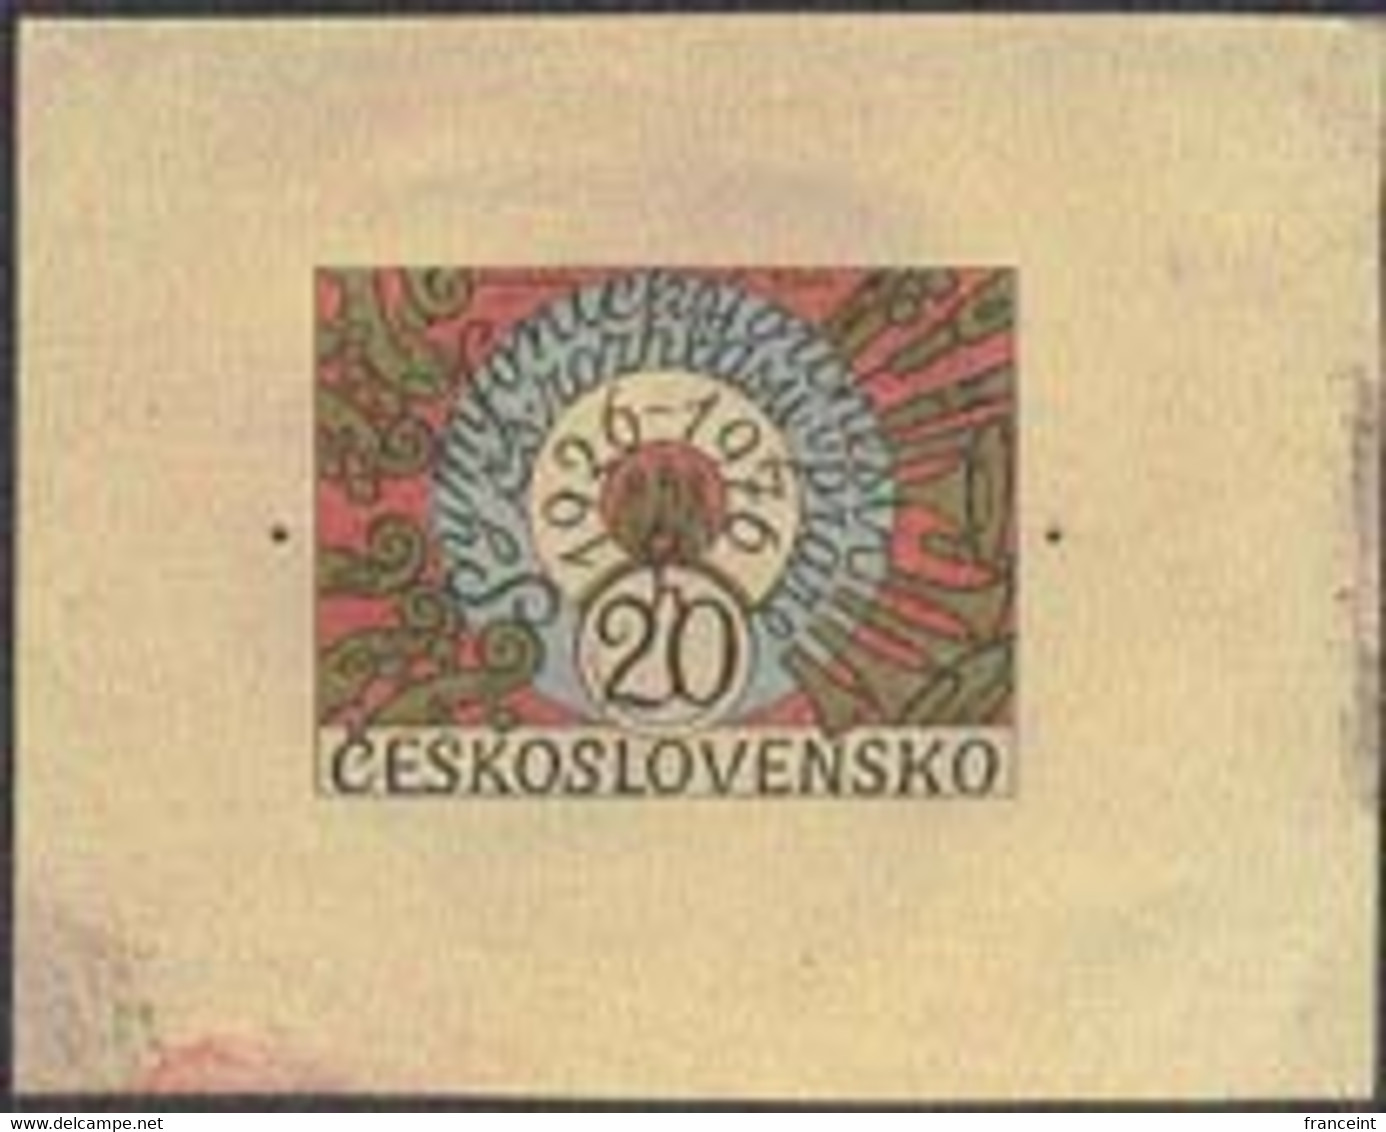 CZECHOSLOVAKIA (1976) Orchestral Instruments. Die Proof In Color. 50th Anniversary Of Radio Prague Orch. Scott No 2063 - Proofs & Reprints